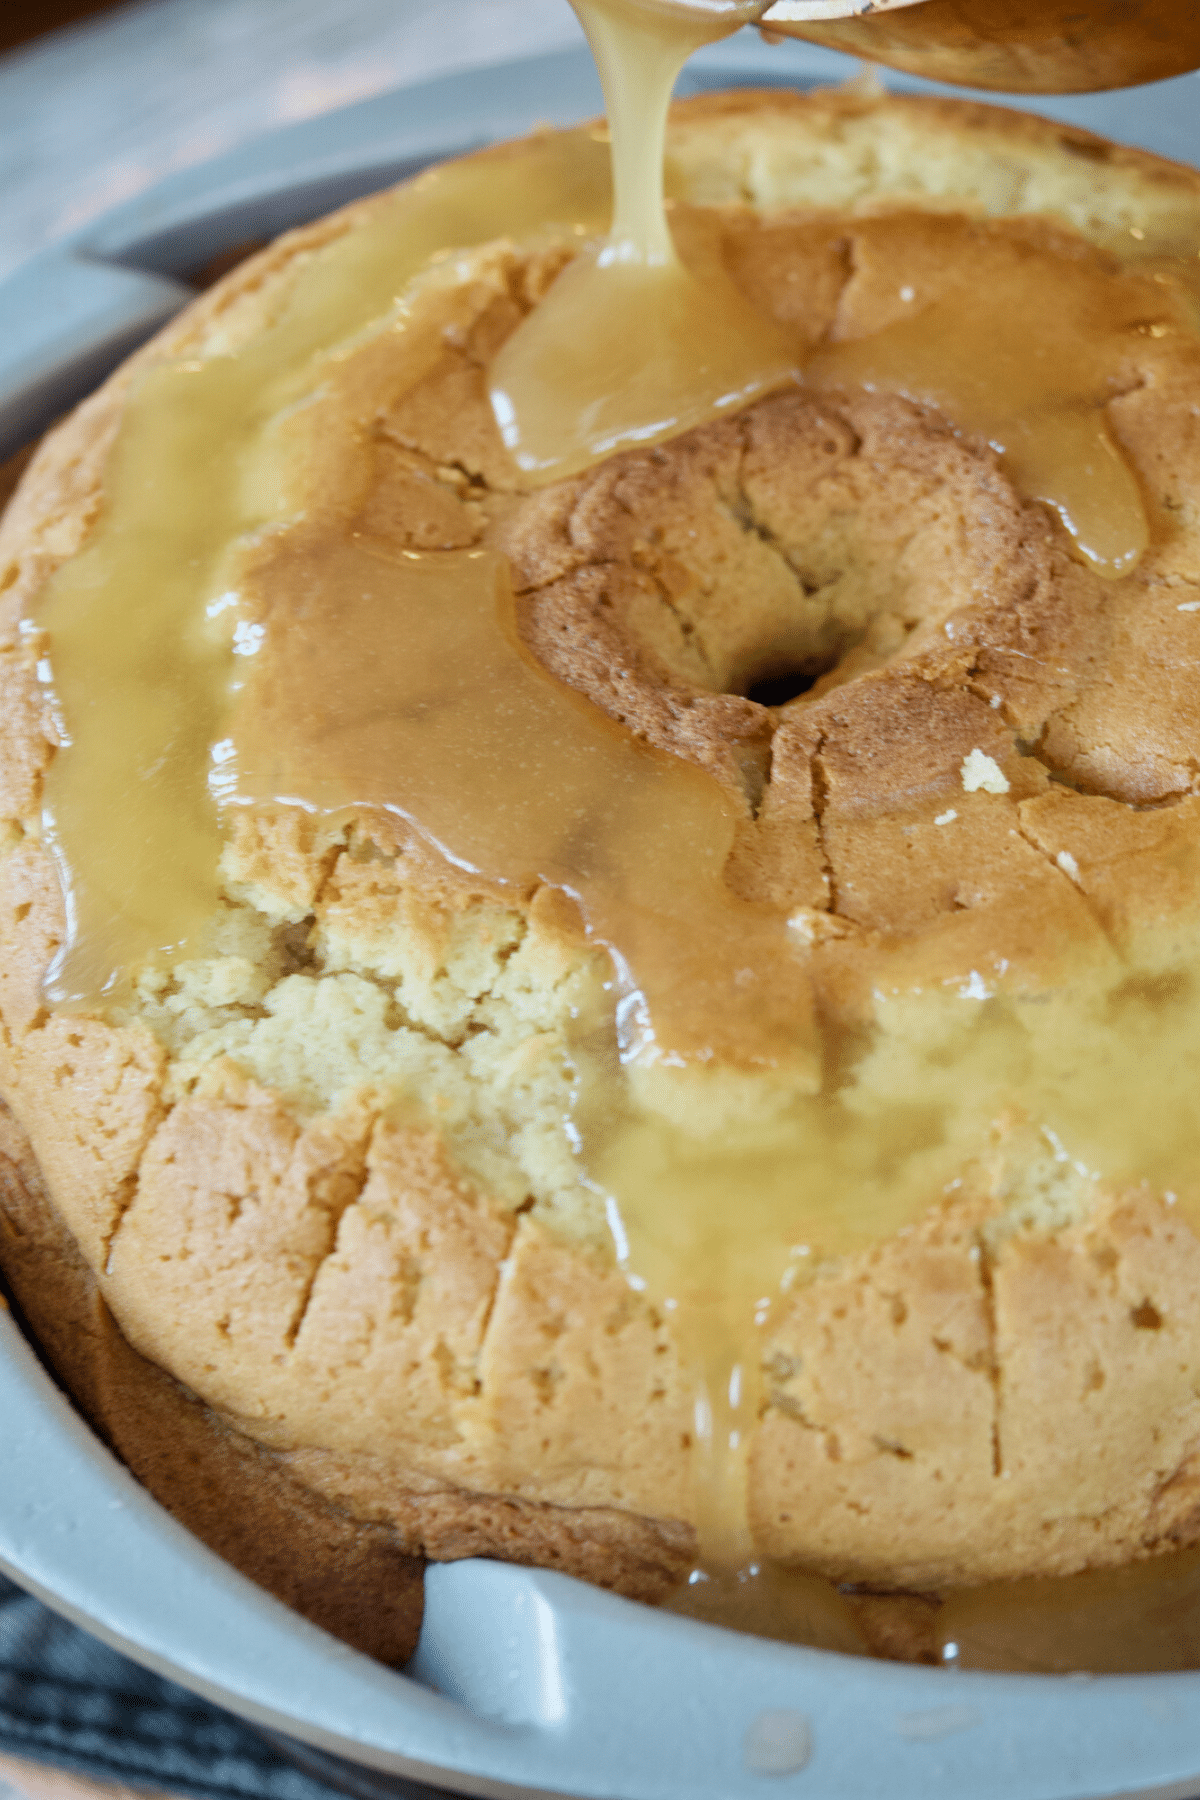 Pouring vanilla sauce over the warm cake. 